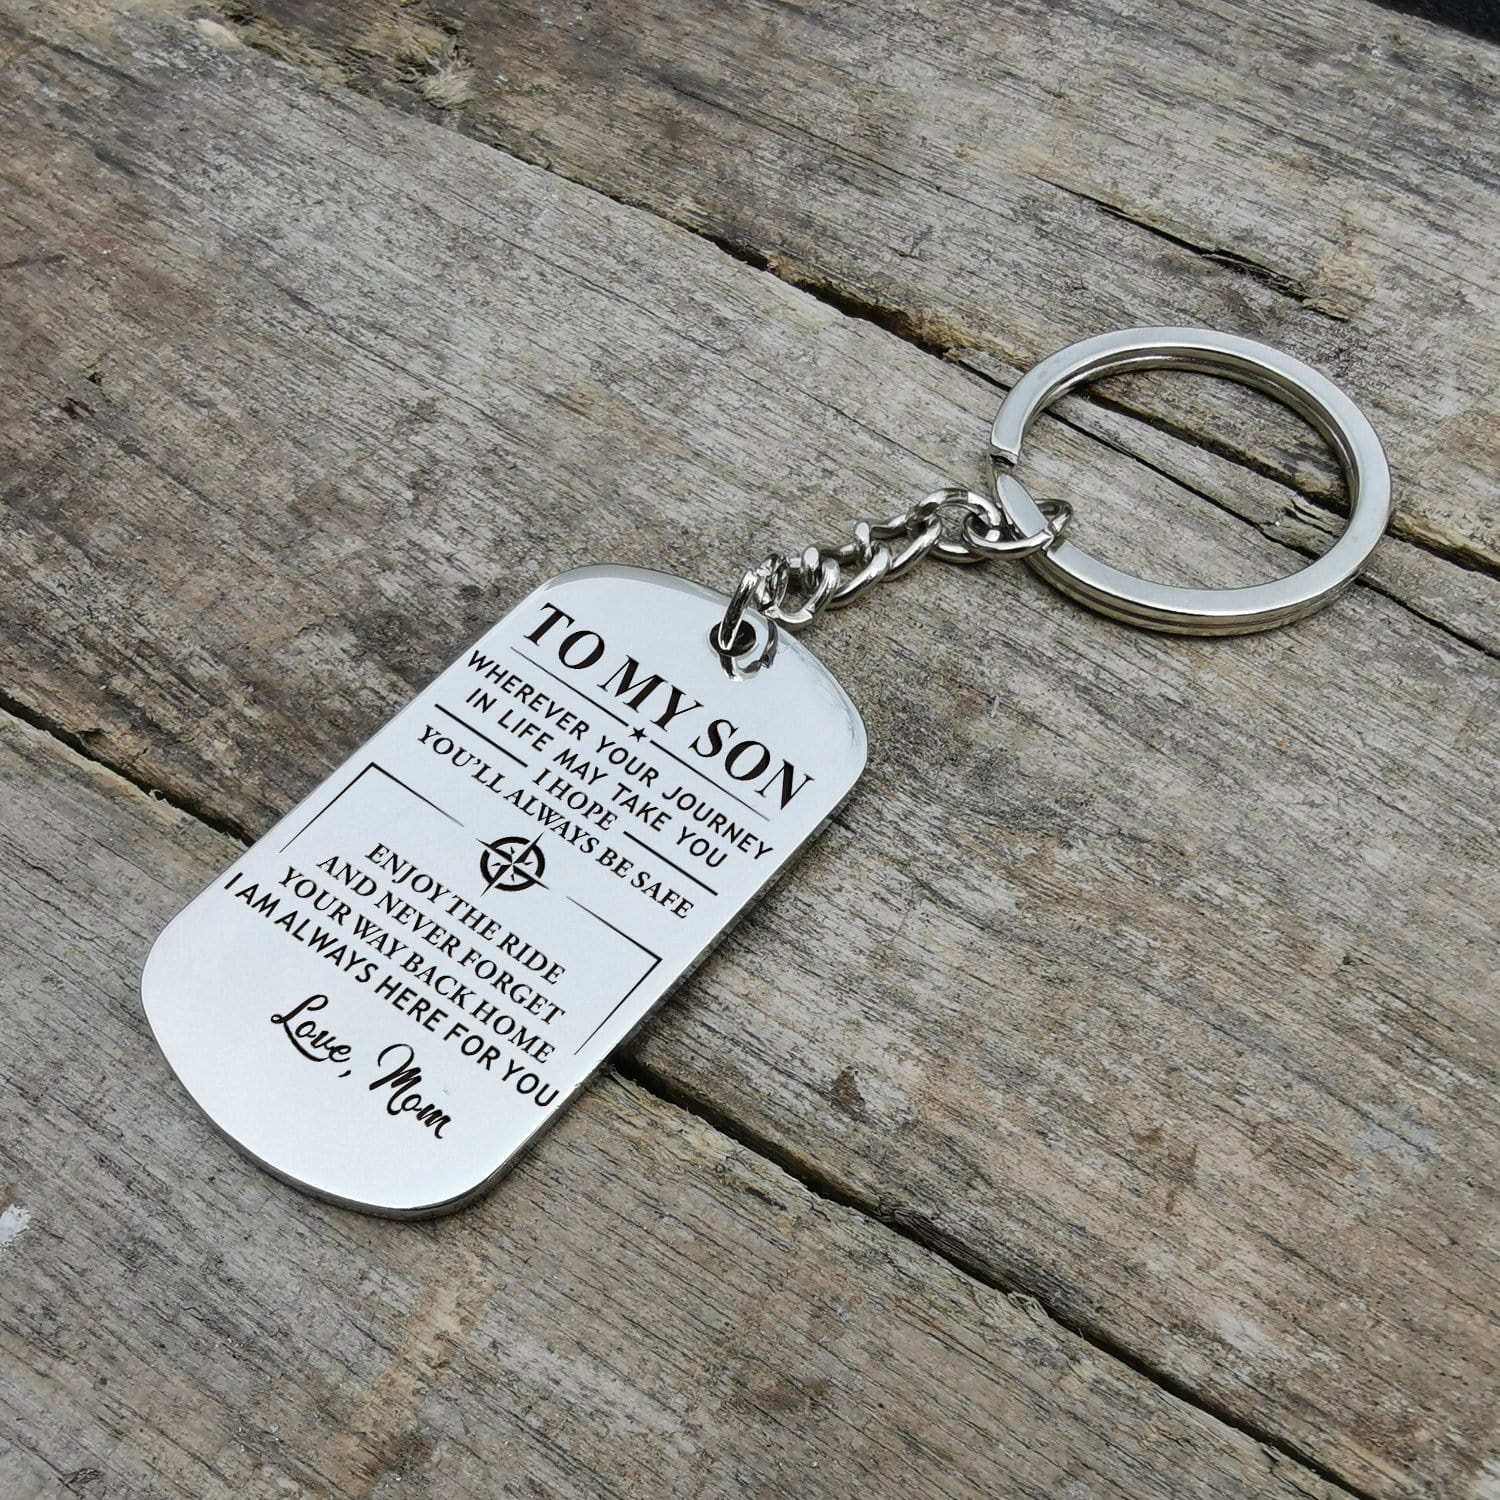 Keychains Mom To Son - I Hope You Will Always Be Safe Personalized Keychain GiveMe-Gifts